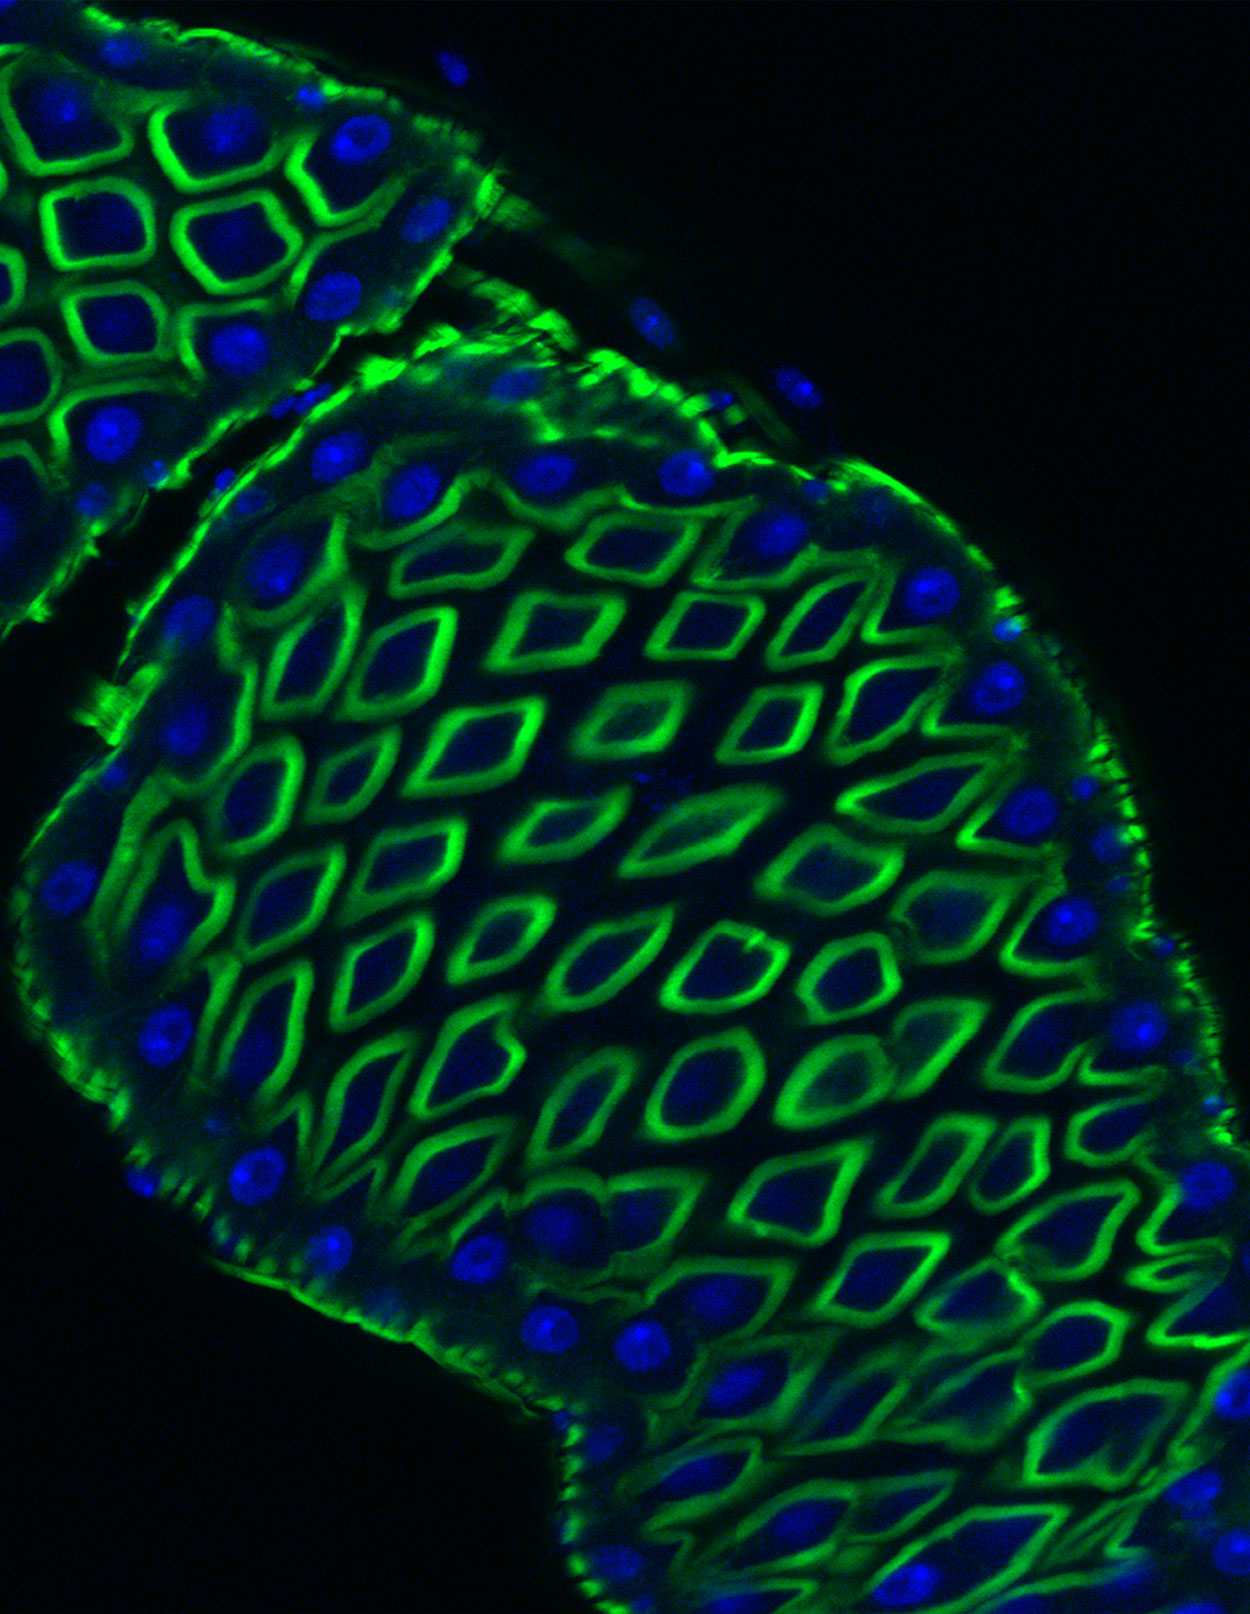 A microscopic photo of blue-green blob representing a fruit fly gut on a black background